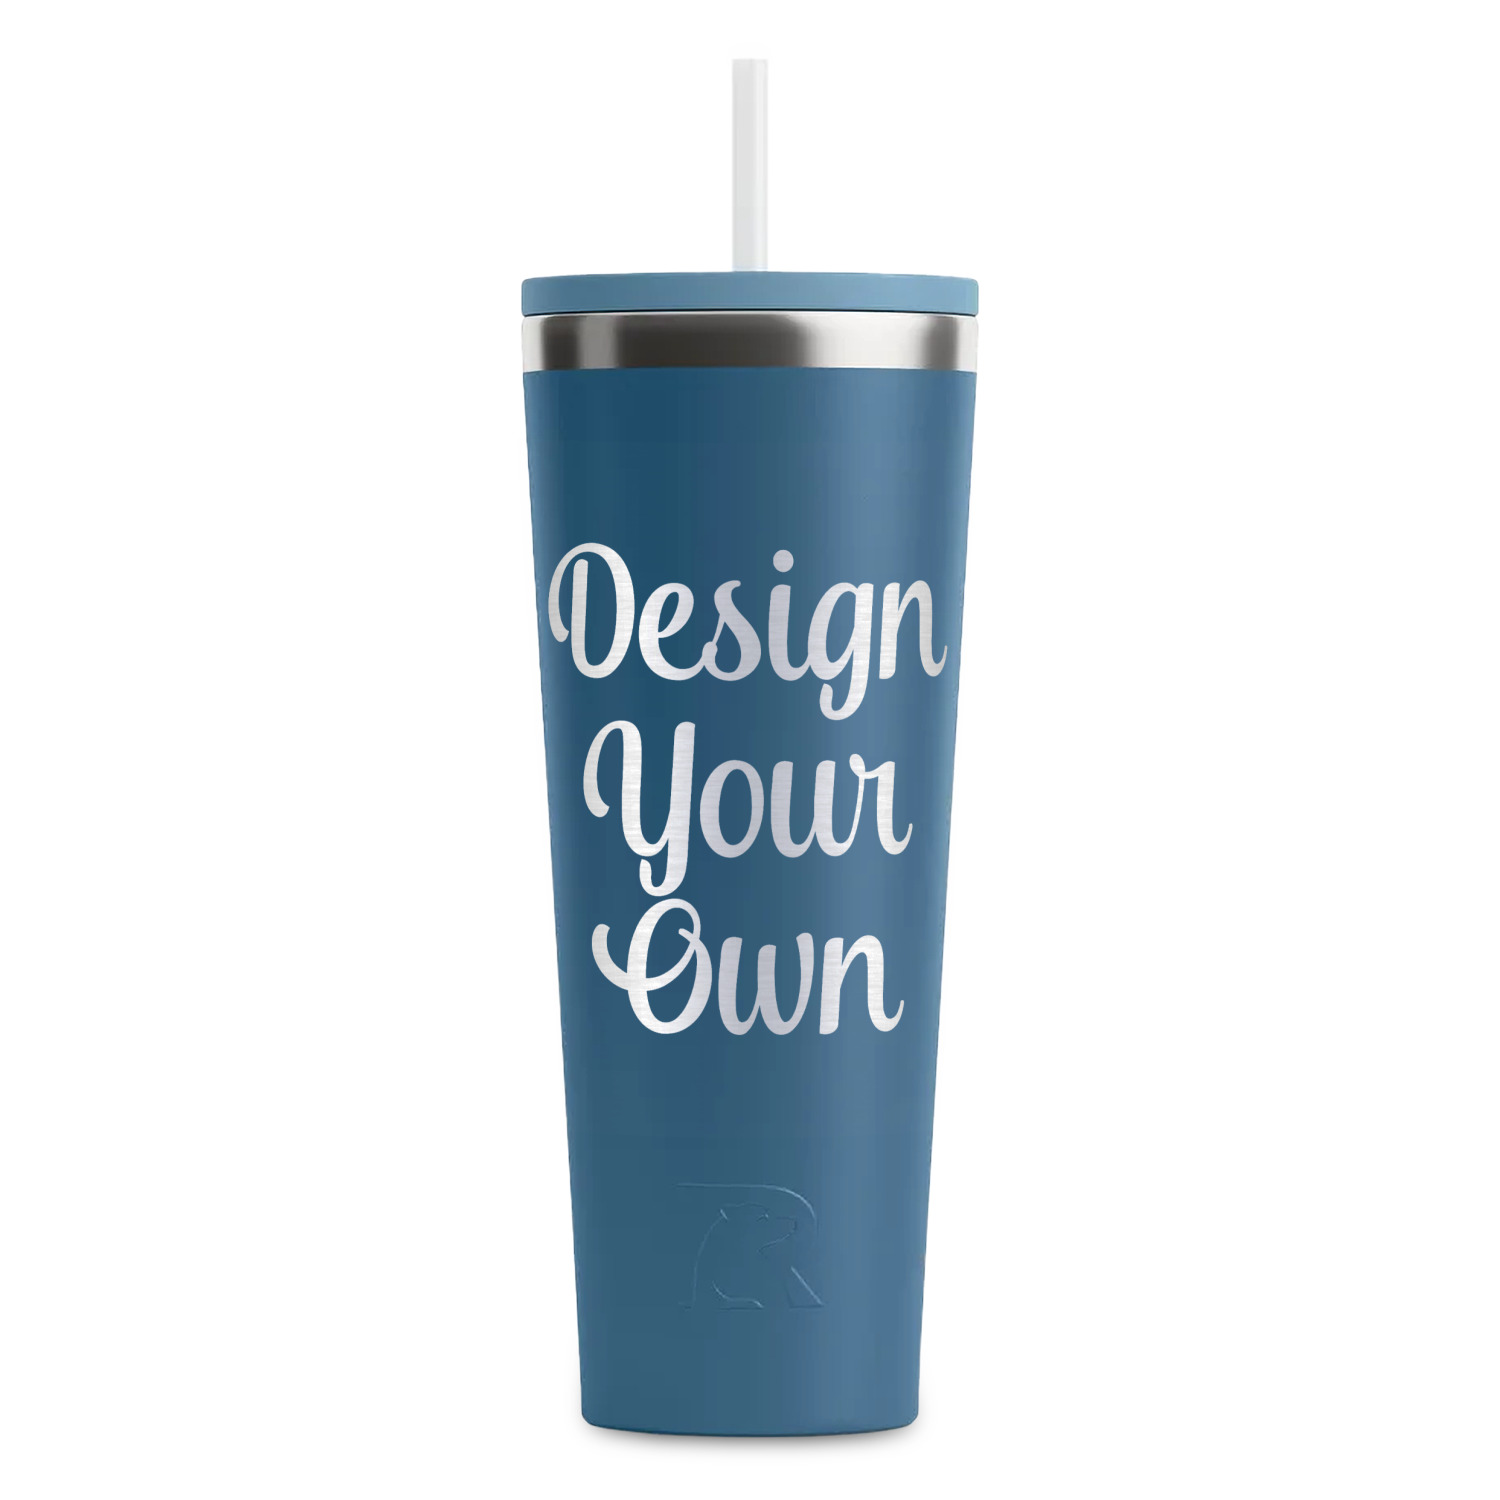 https://www.youcustomizeit.com/common/MAKE/965833/Design-Your-Own-Steel-Blue-RTIC-Everyday-Tumbler-28-oz-Front.jpg?lm=1698249967